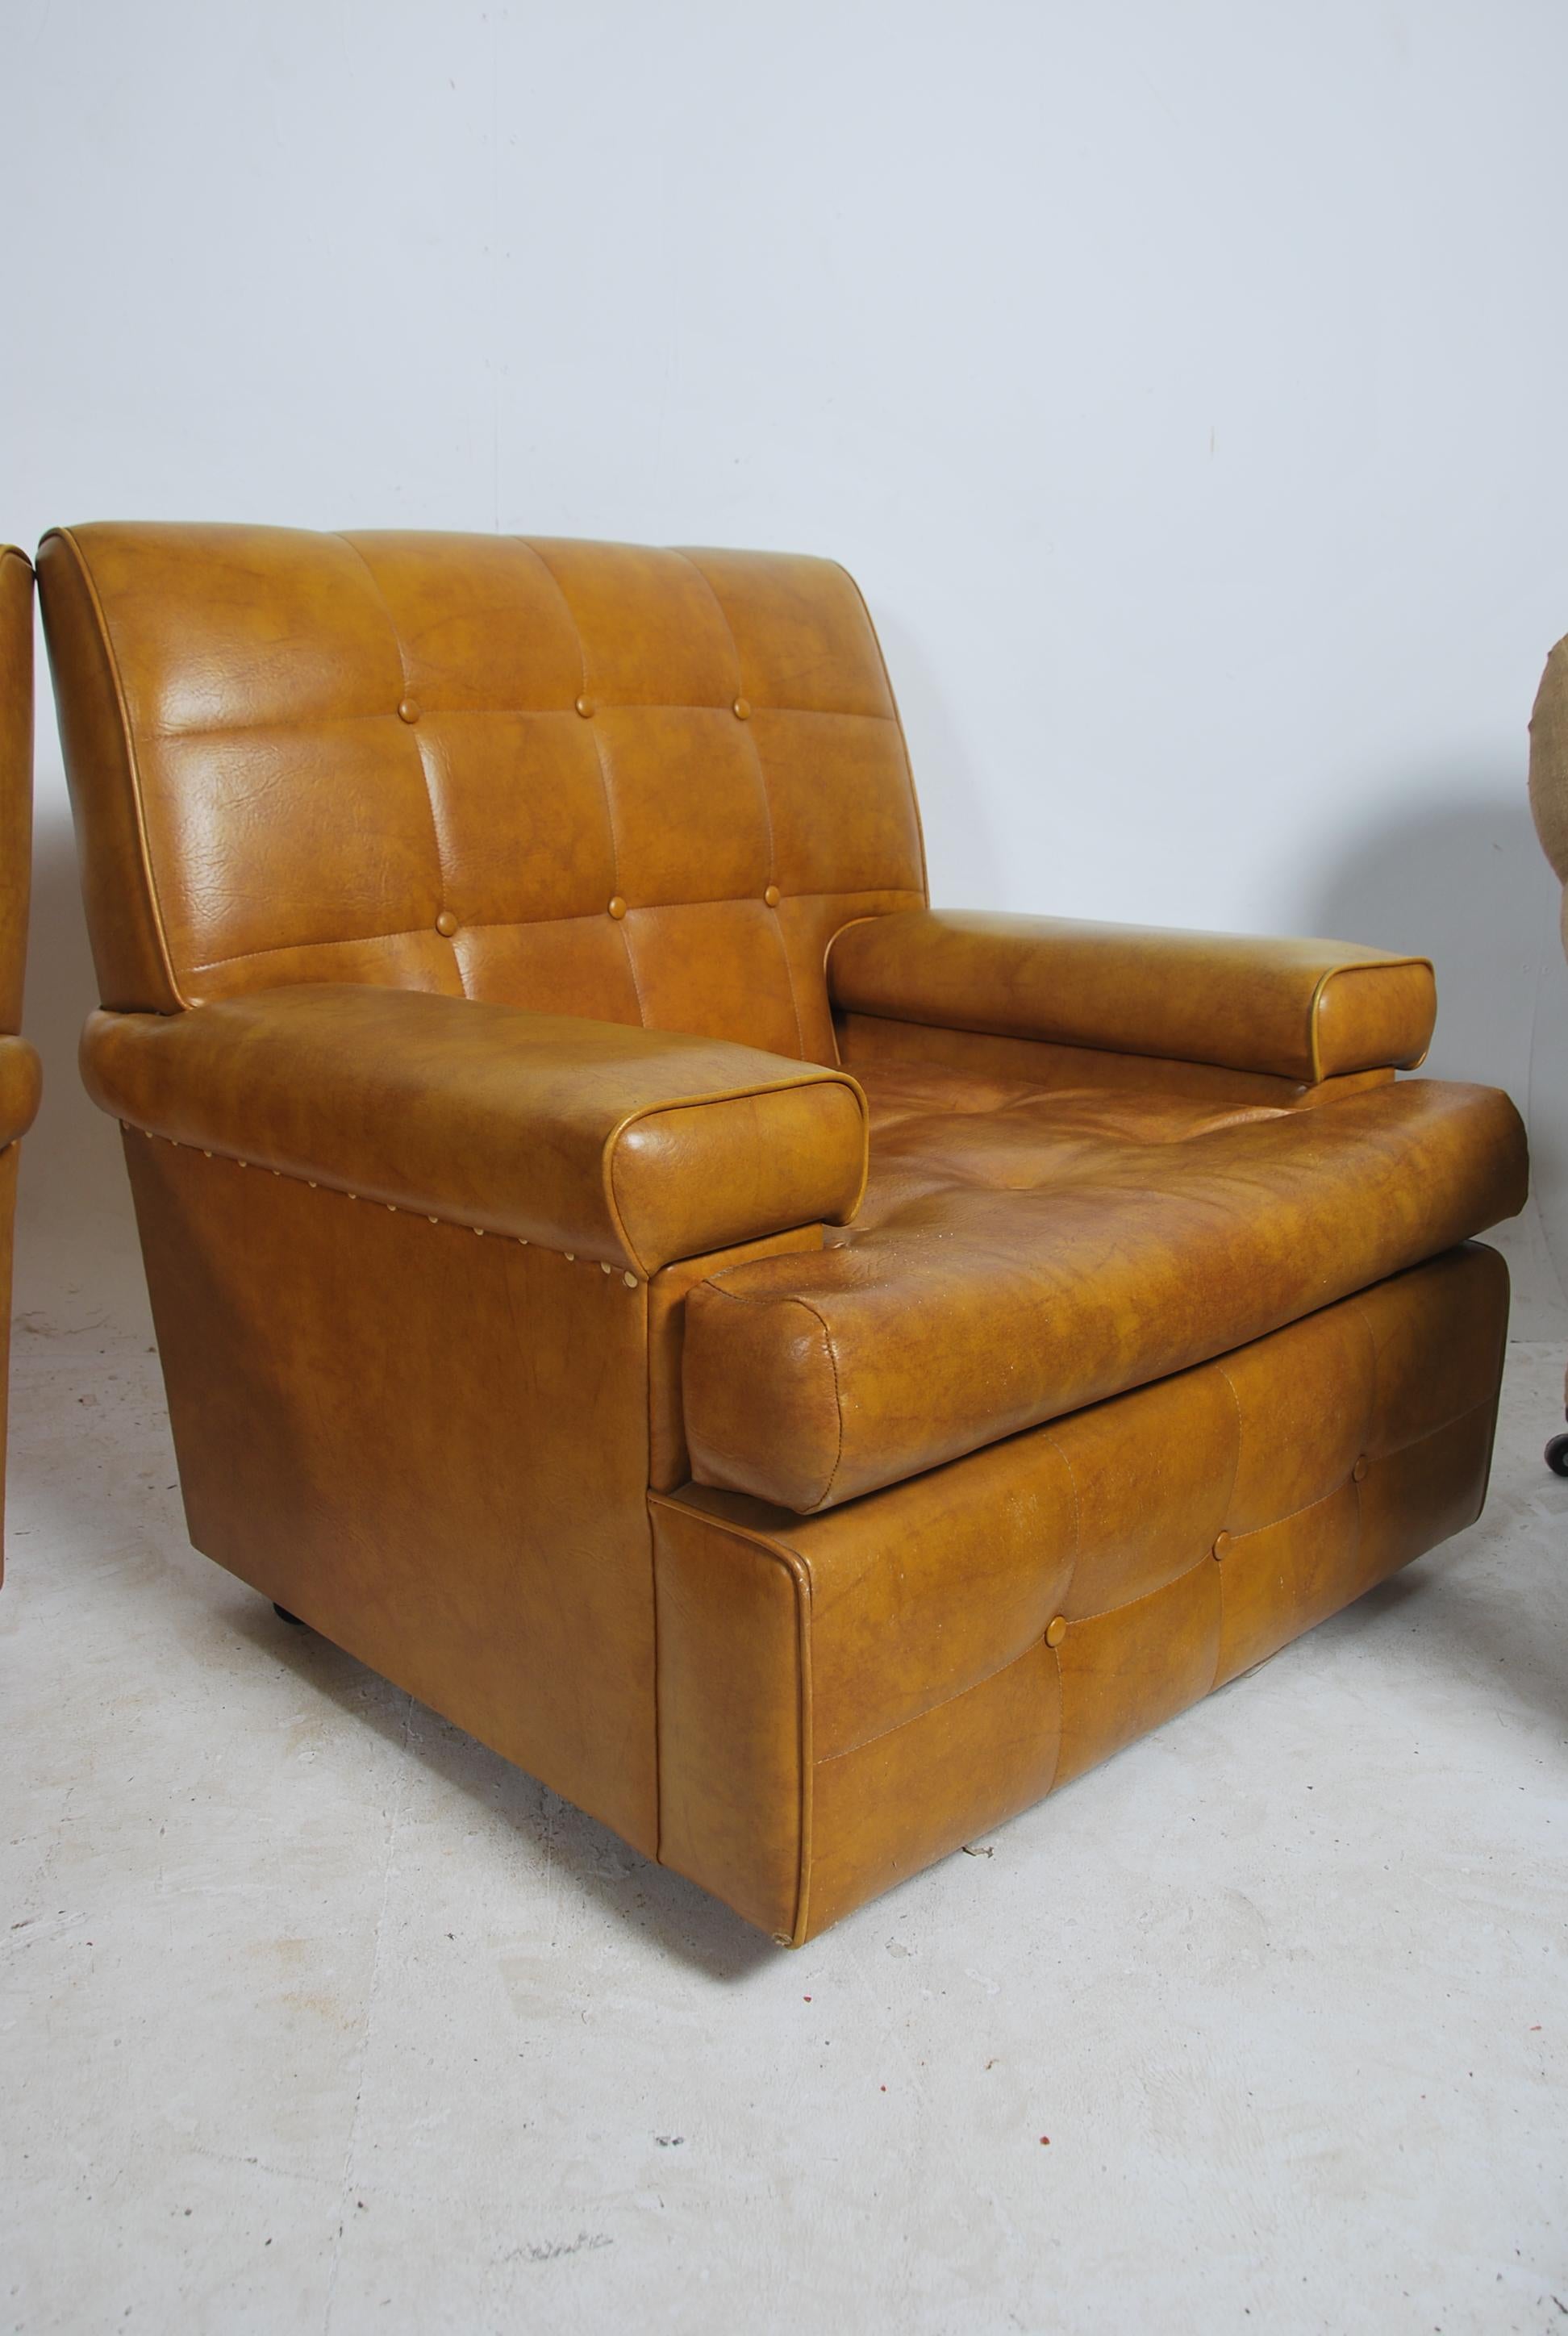 The backs and seats with six tufts (buttons) and the fronts with three tufts (buttons). The sides and backs plain. The edges self-piped. On castors. In as new condition. Designer unknown. Extremely comfortable, hard-wearing and suitable for every